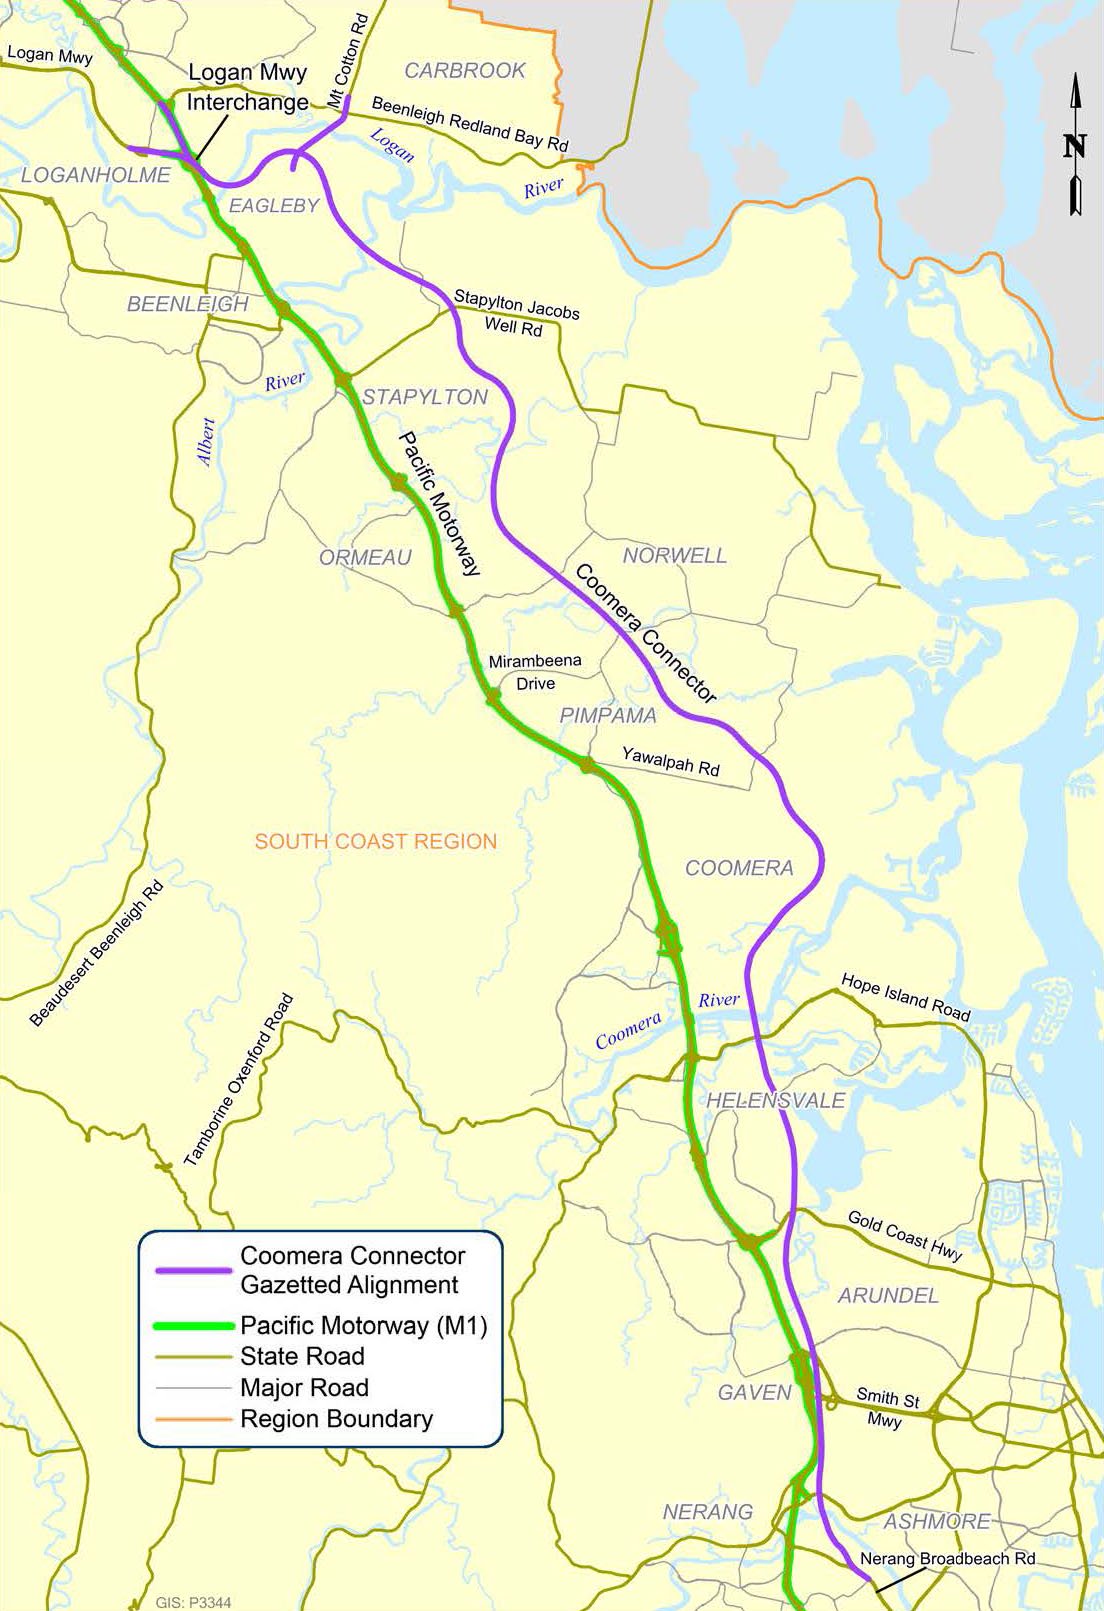 coomera-connector-alignment-map-0319